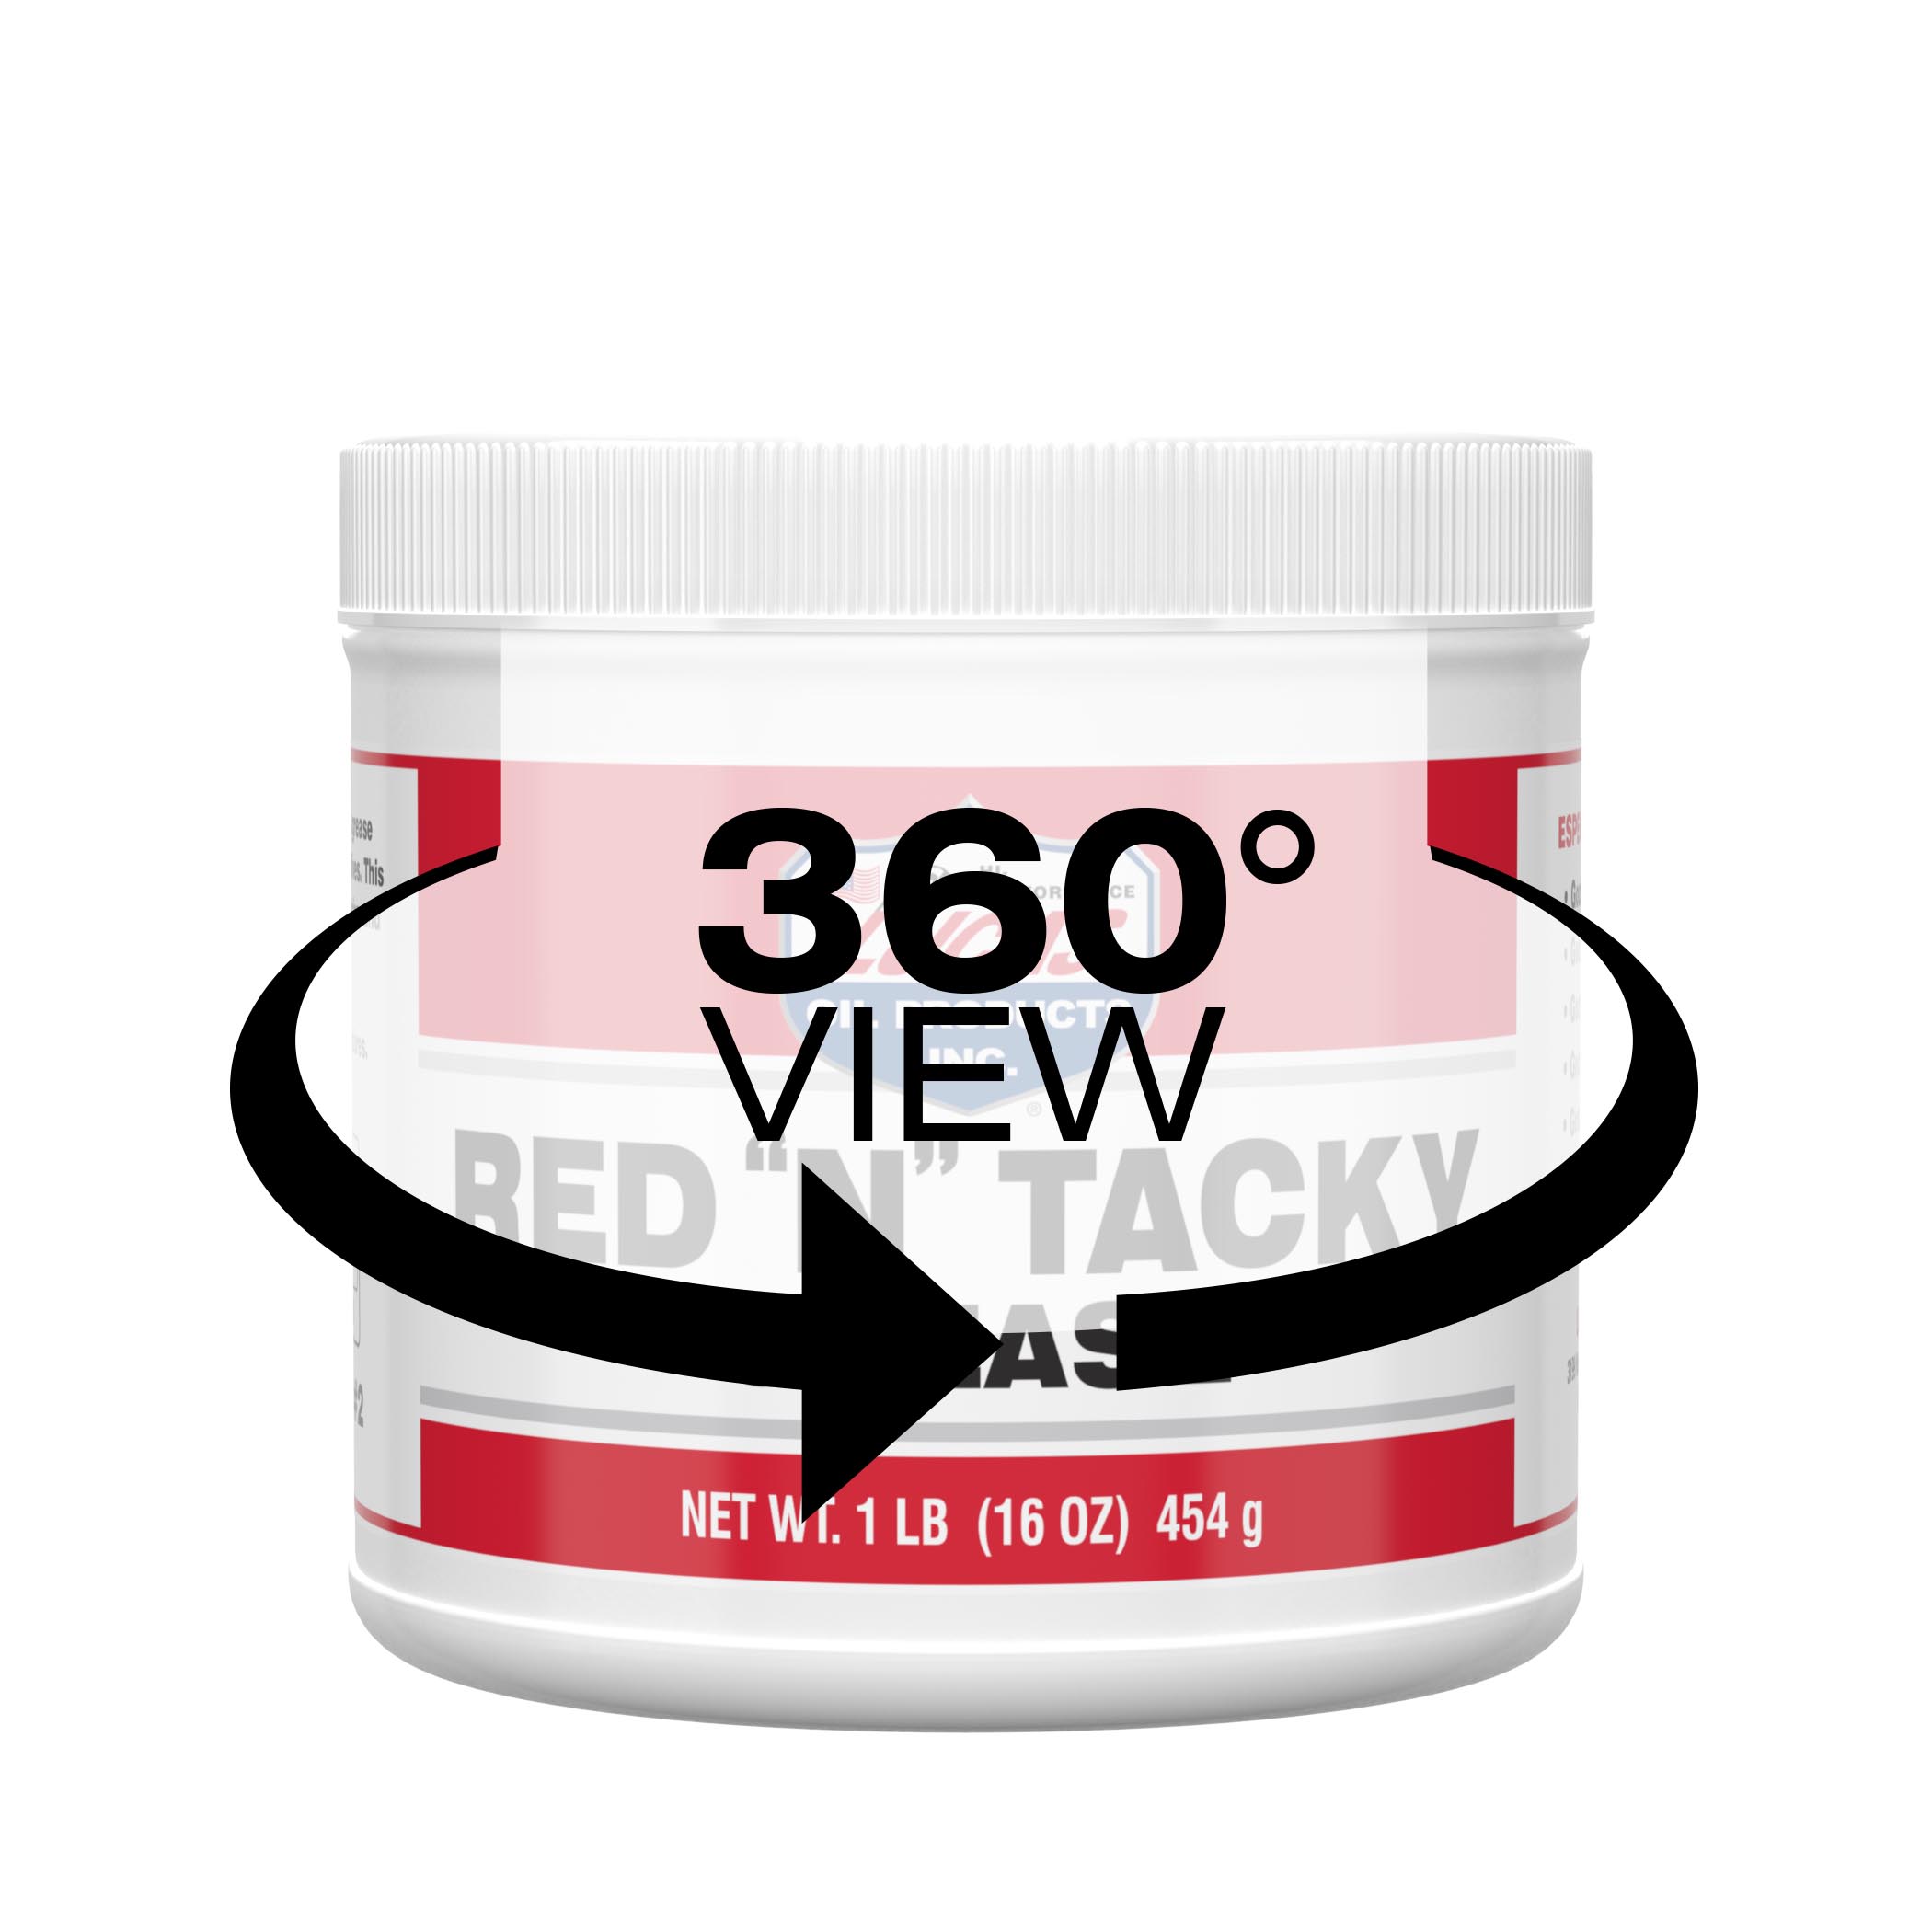 view the 360